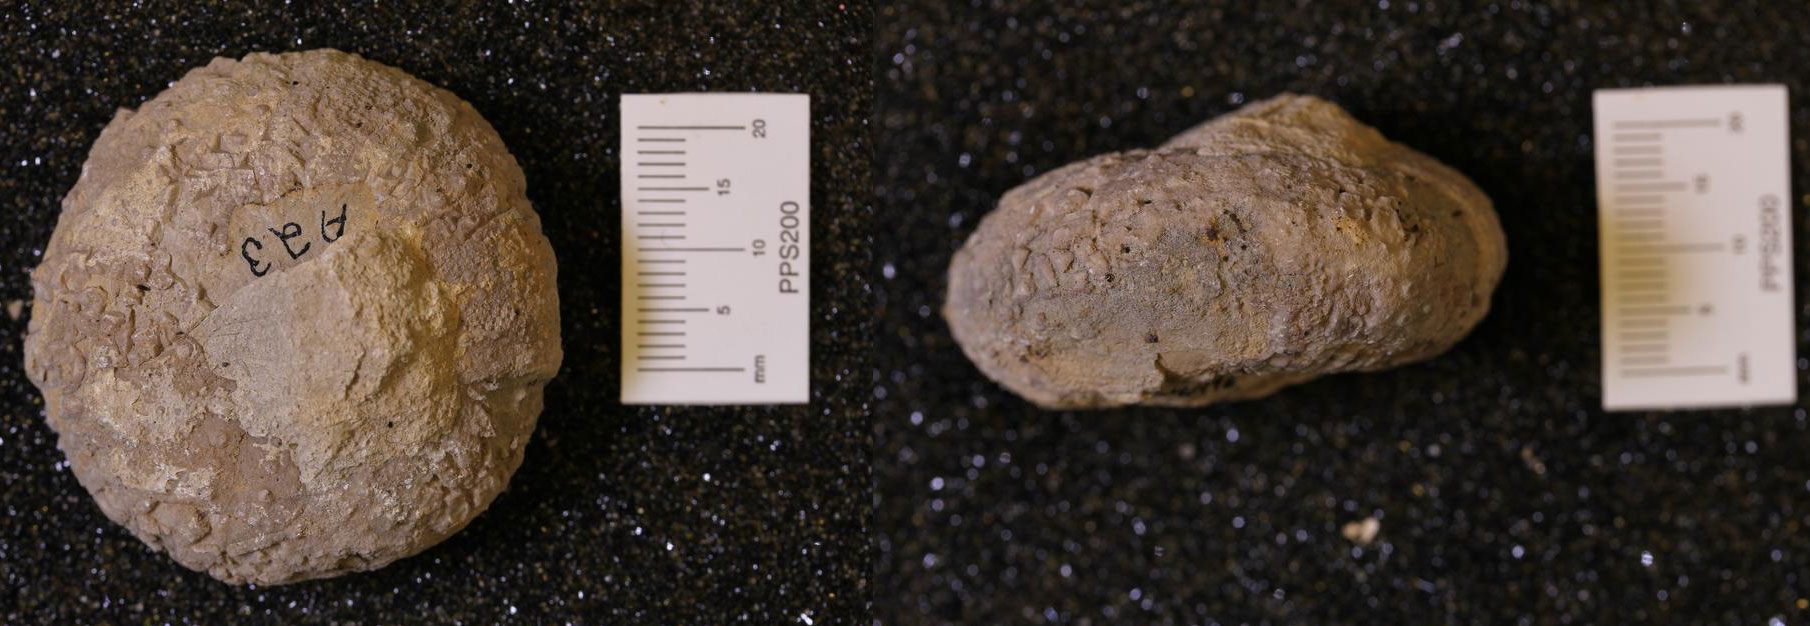 Photos of an unidentified echinoid from the Cretaceous of Texas in end and side views. The echinoid is rounded when viewed from above, somewhat flattened when viewed from the side.